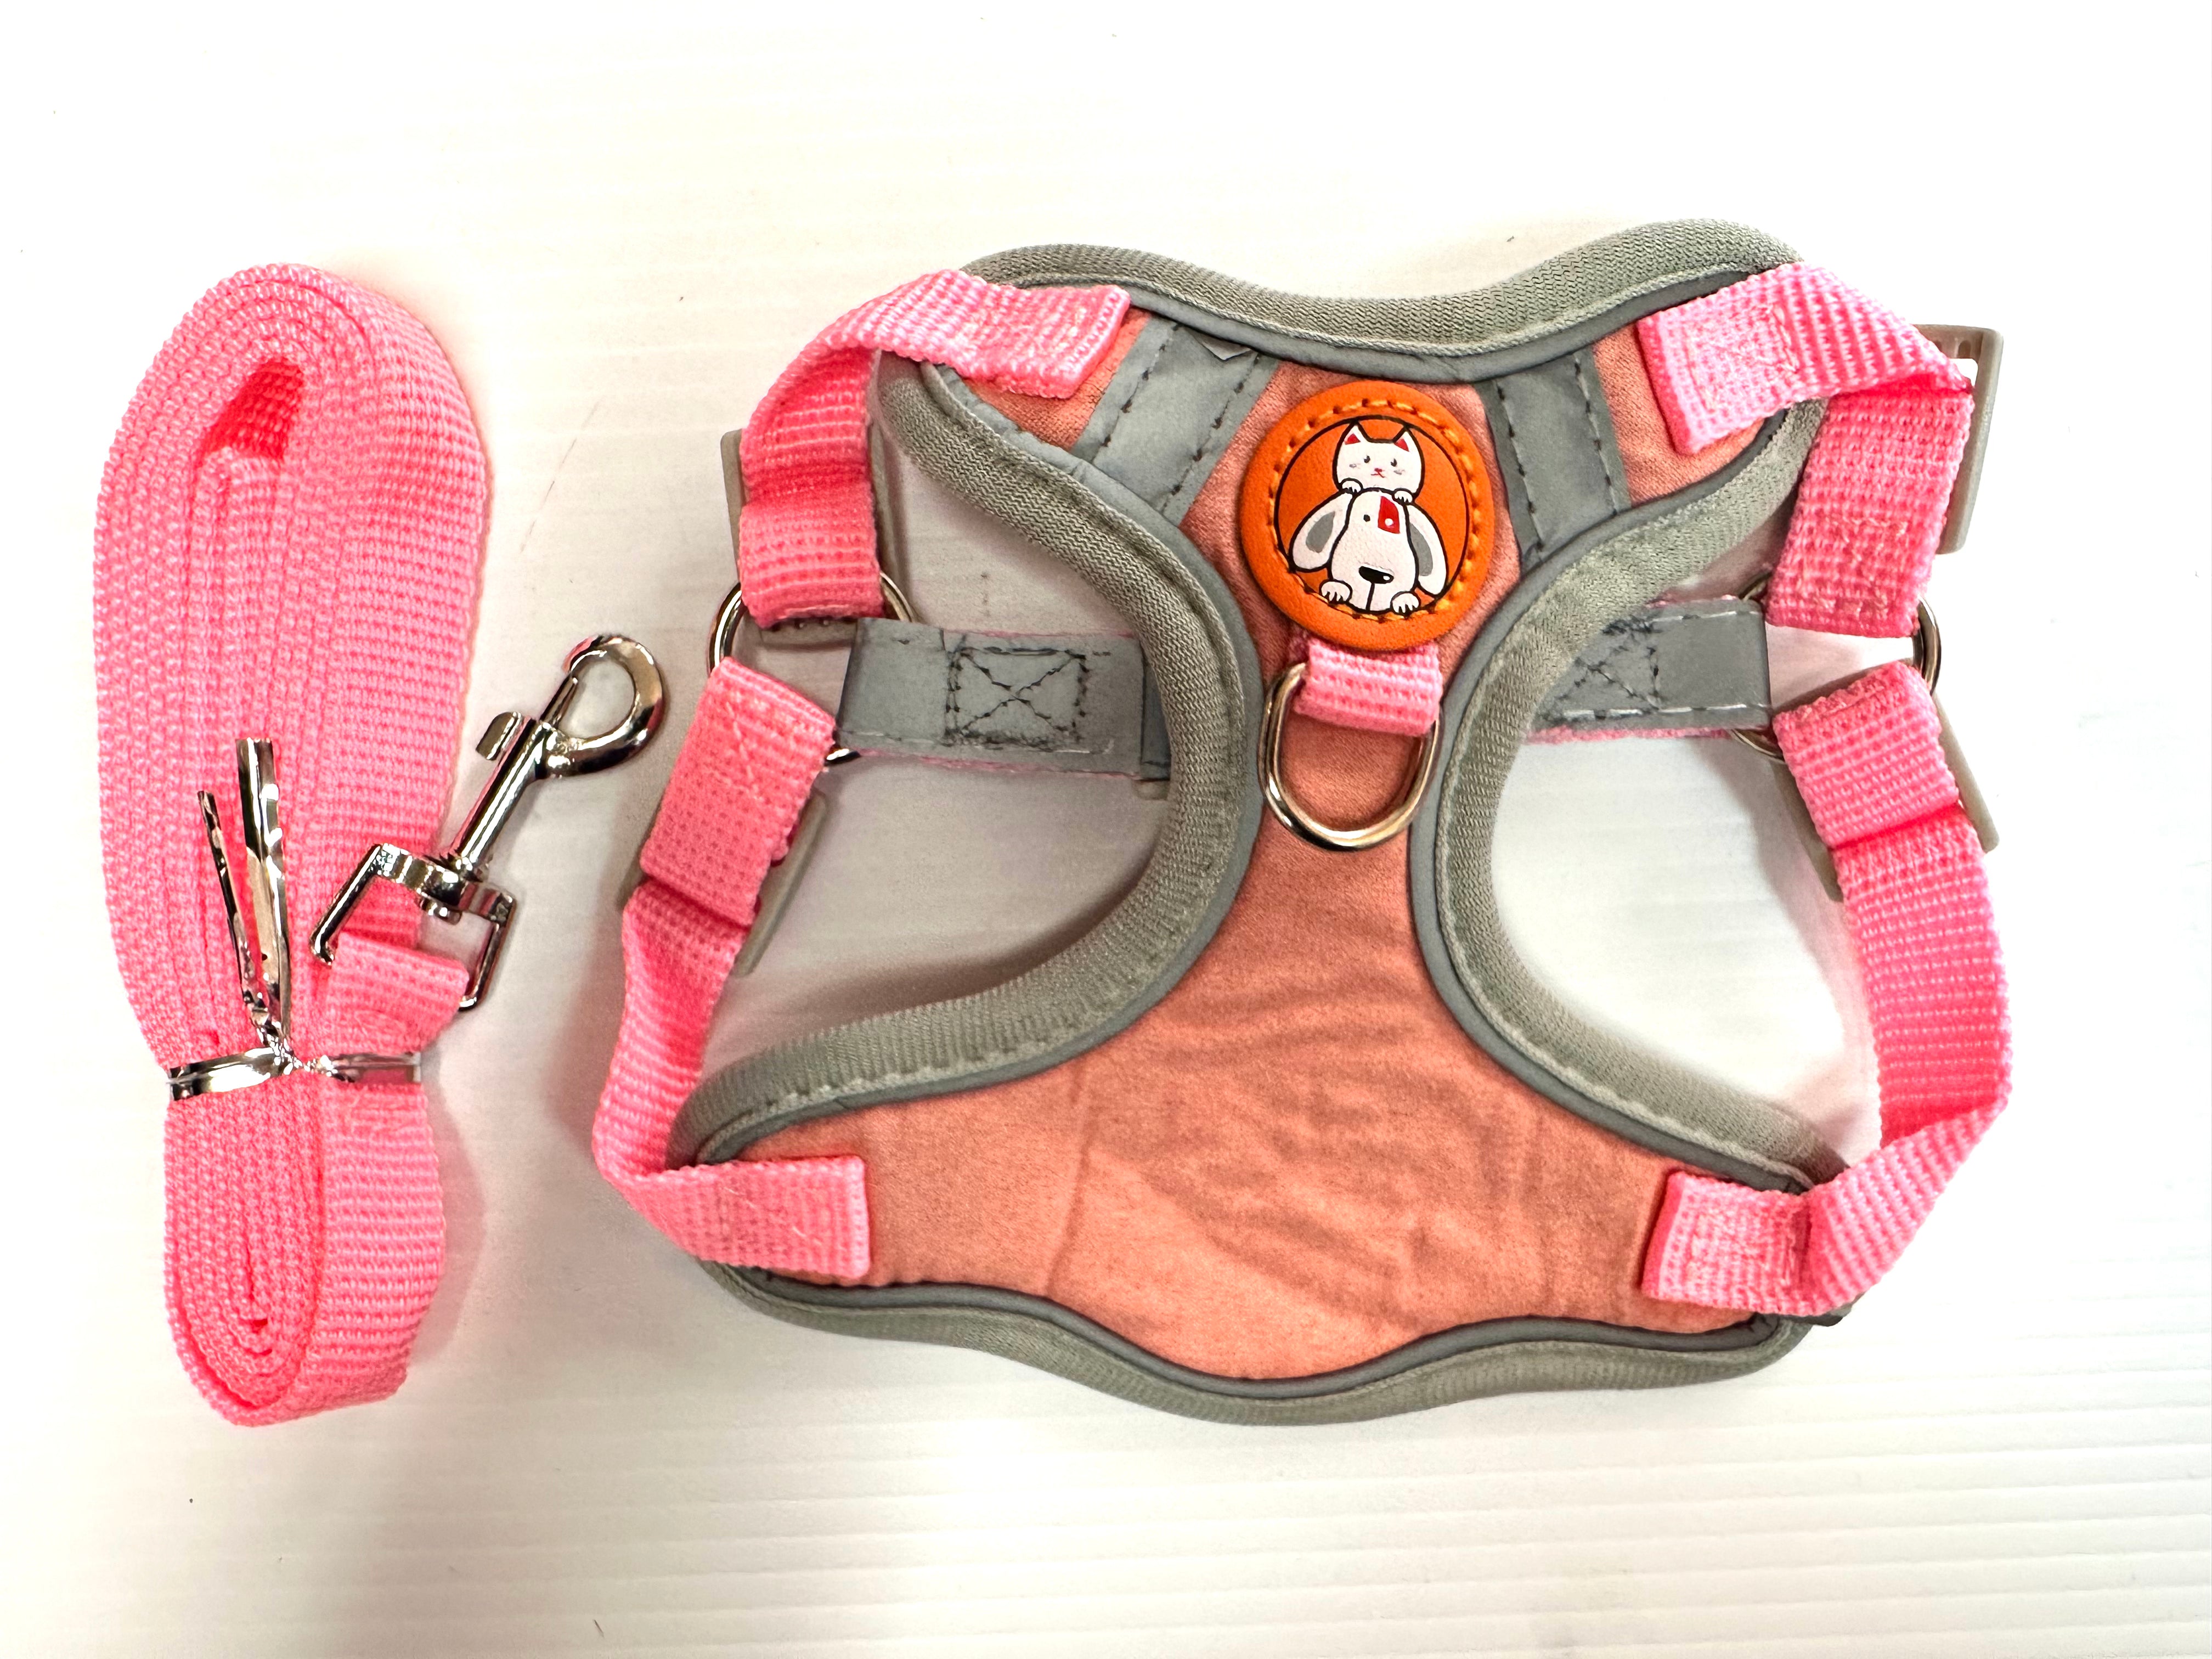 Step-in Harness & Leash Sets with Reflective Trim